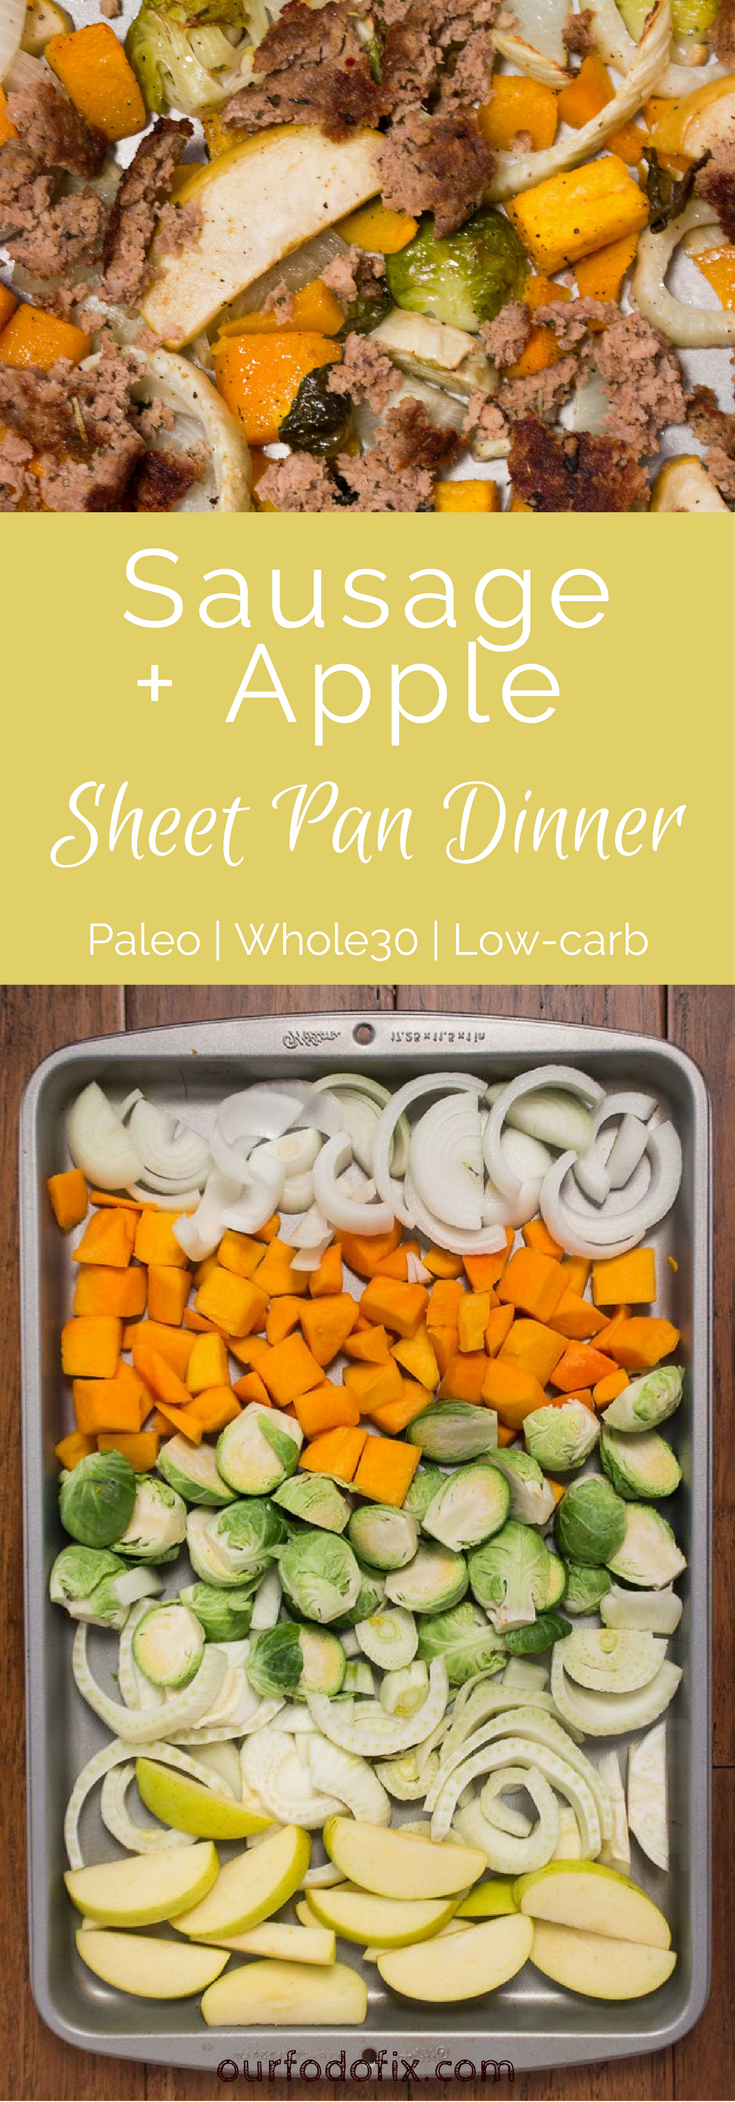 An entire fall dinner entirely made in one pan. Paleo recipes | Whole30 recipes | Dinner recipes | One pan meals | Quick dinner | Fall recipes | Easy meals | Pork recipes | Vegan option | Vegetable recipes | Simple recipes 